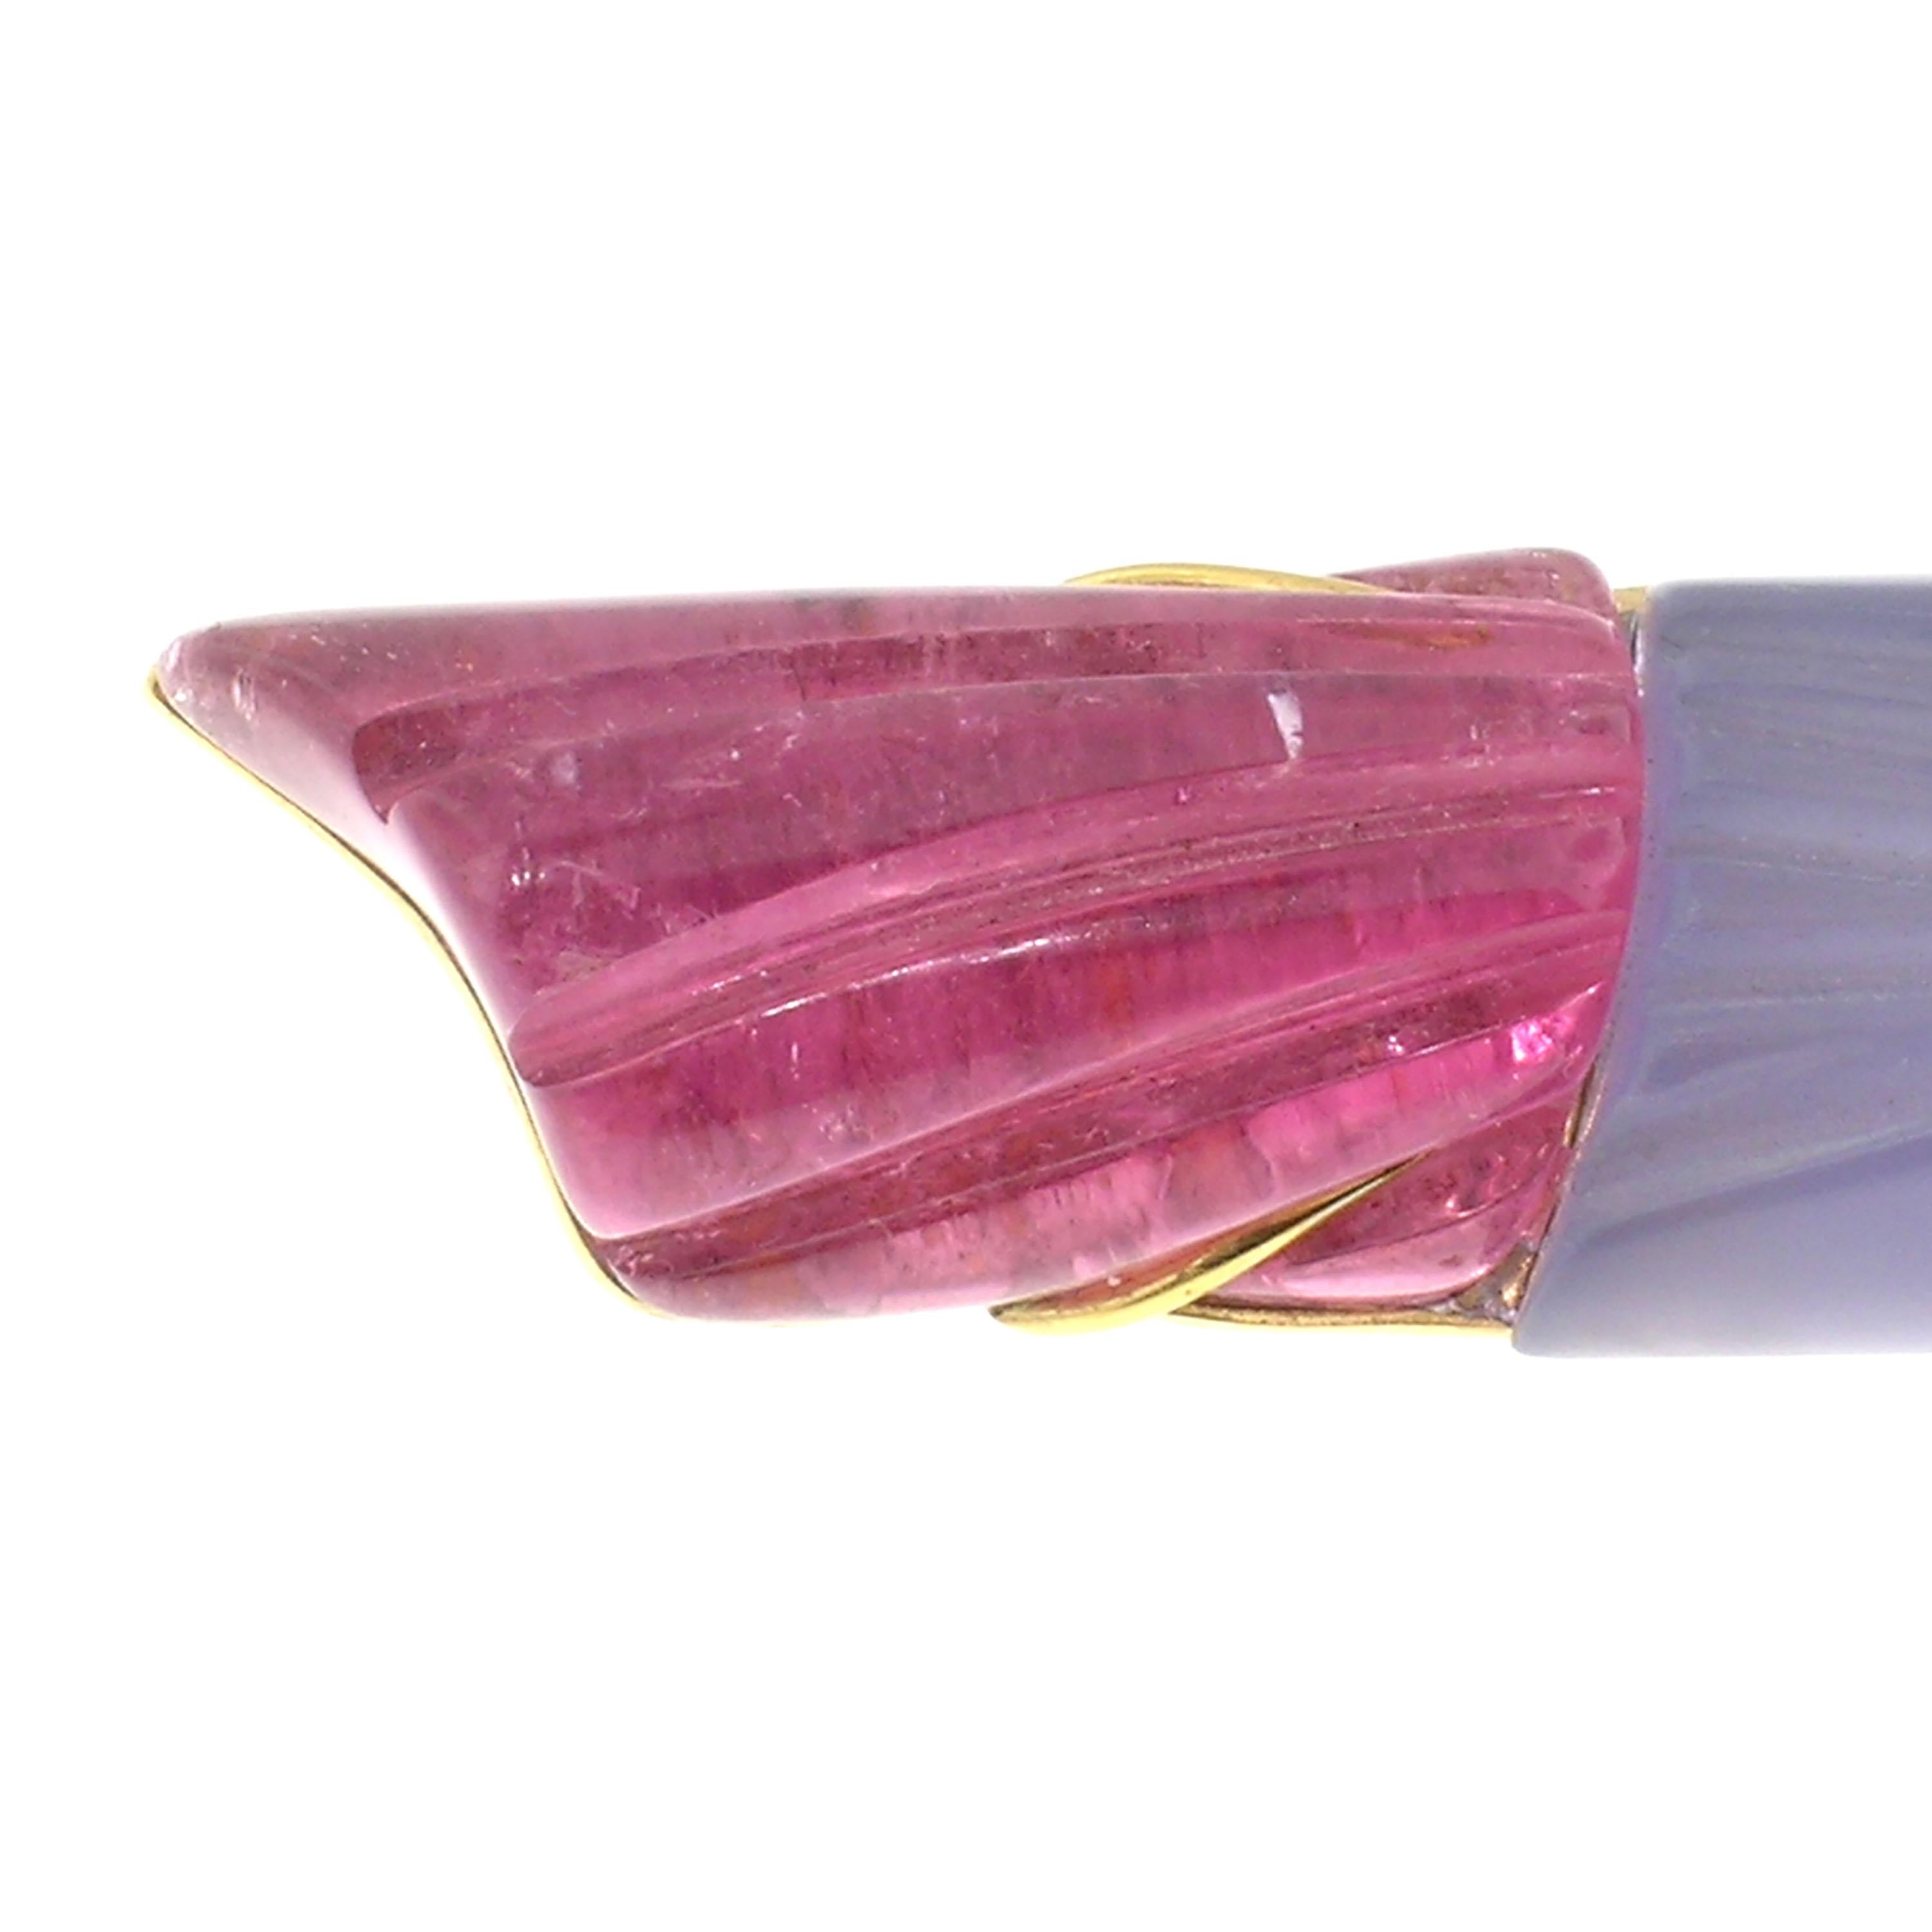 This elegantly carved torch is an exquisite signature piece of jewelry. The chalcedony carving is perfectly married to this pink tourmaline carving; both are by Steve Walters. This 18kt piece of jewelry is perfectly made to enhance rather than